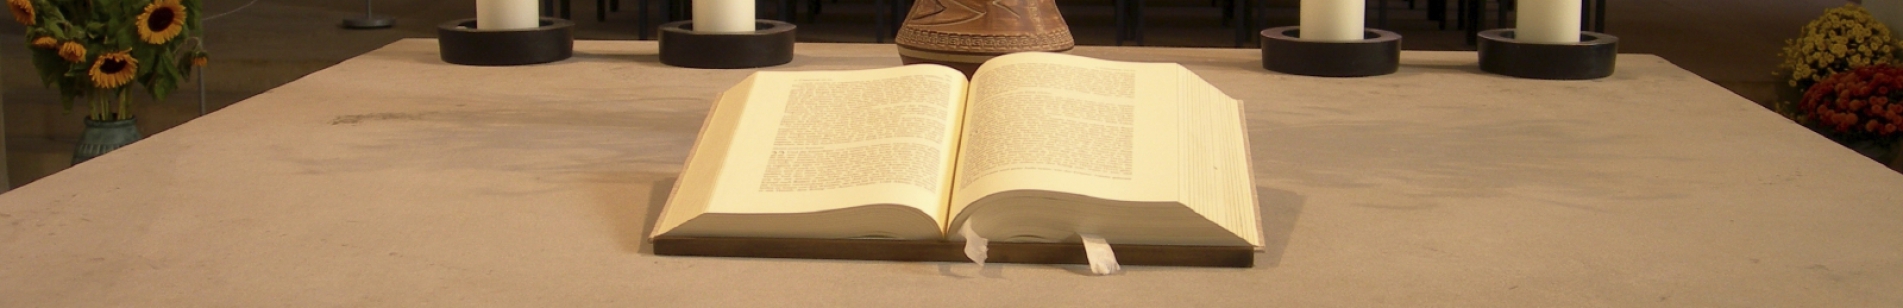 Open Bible for scripture readings